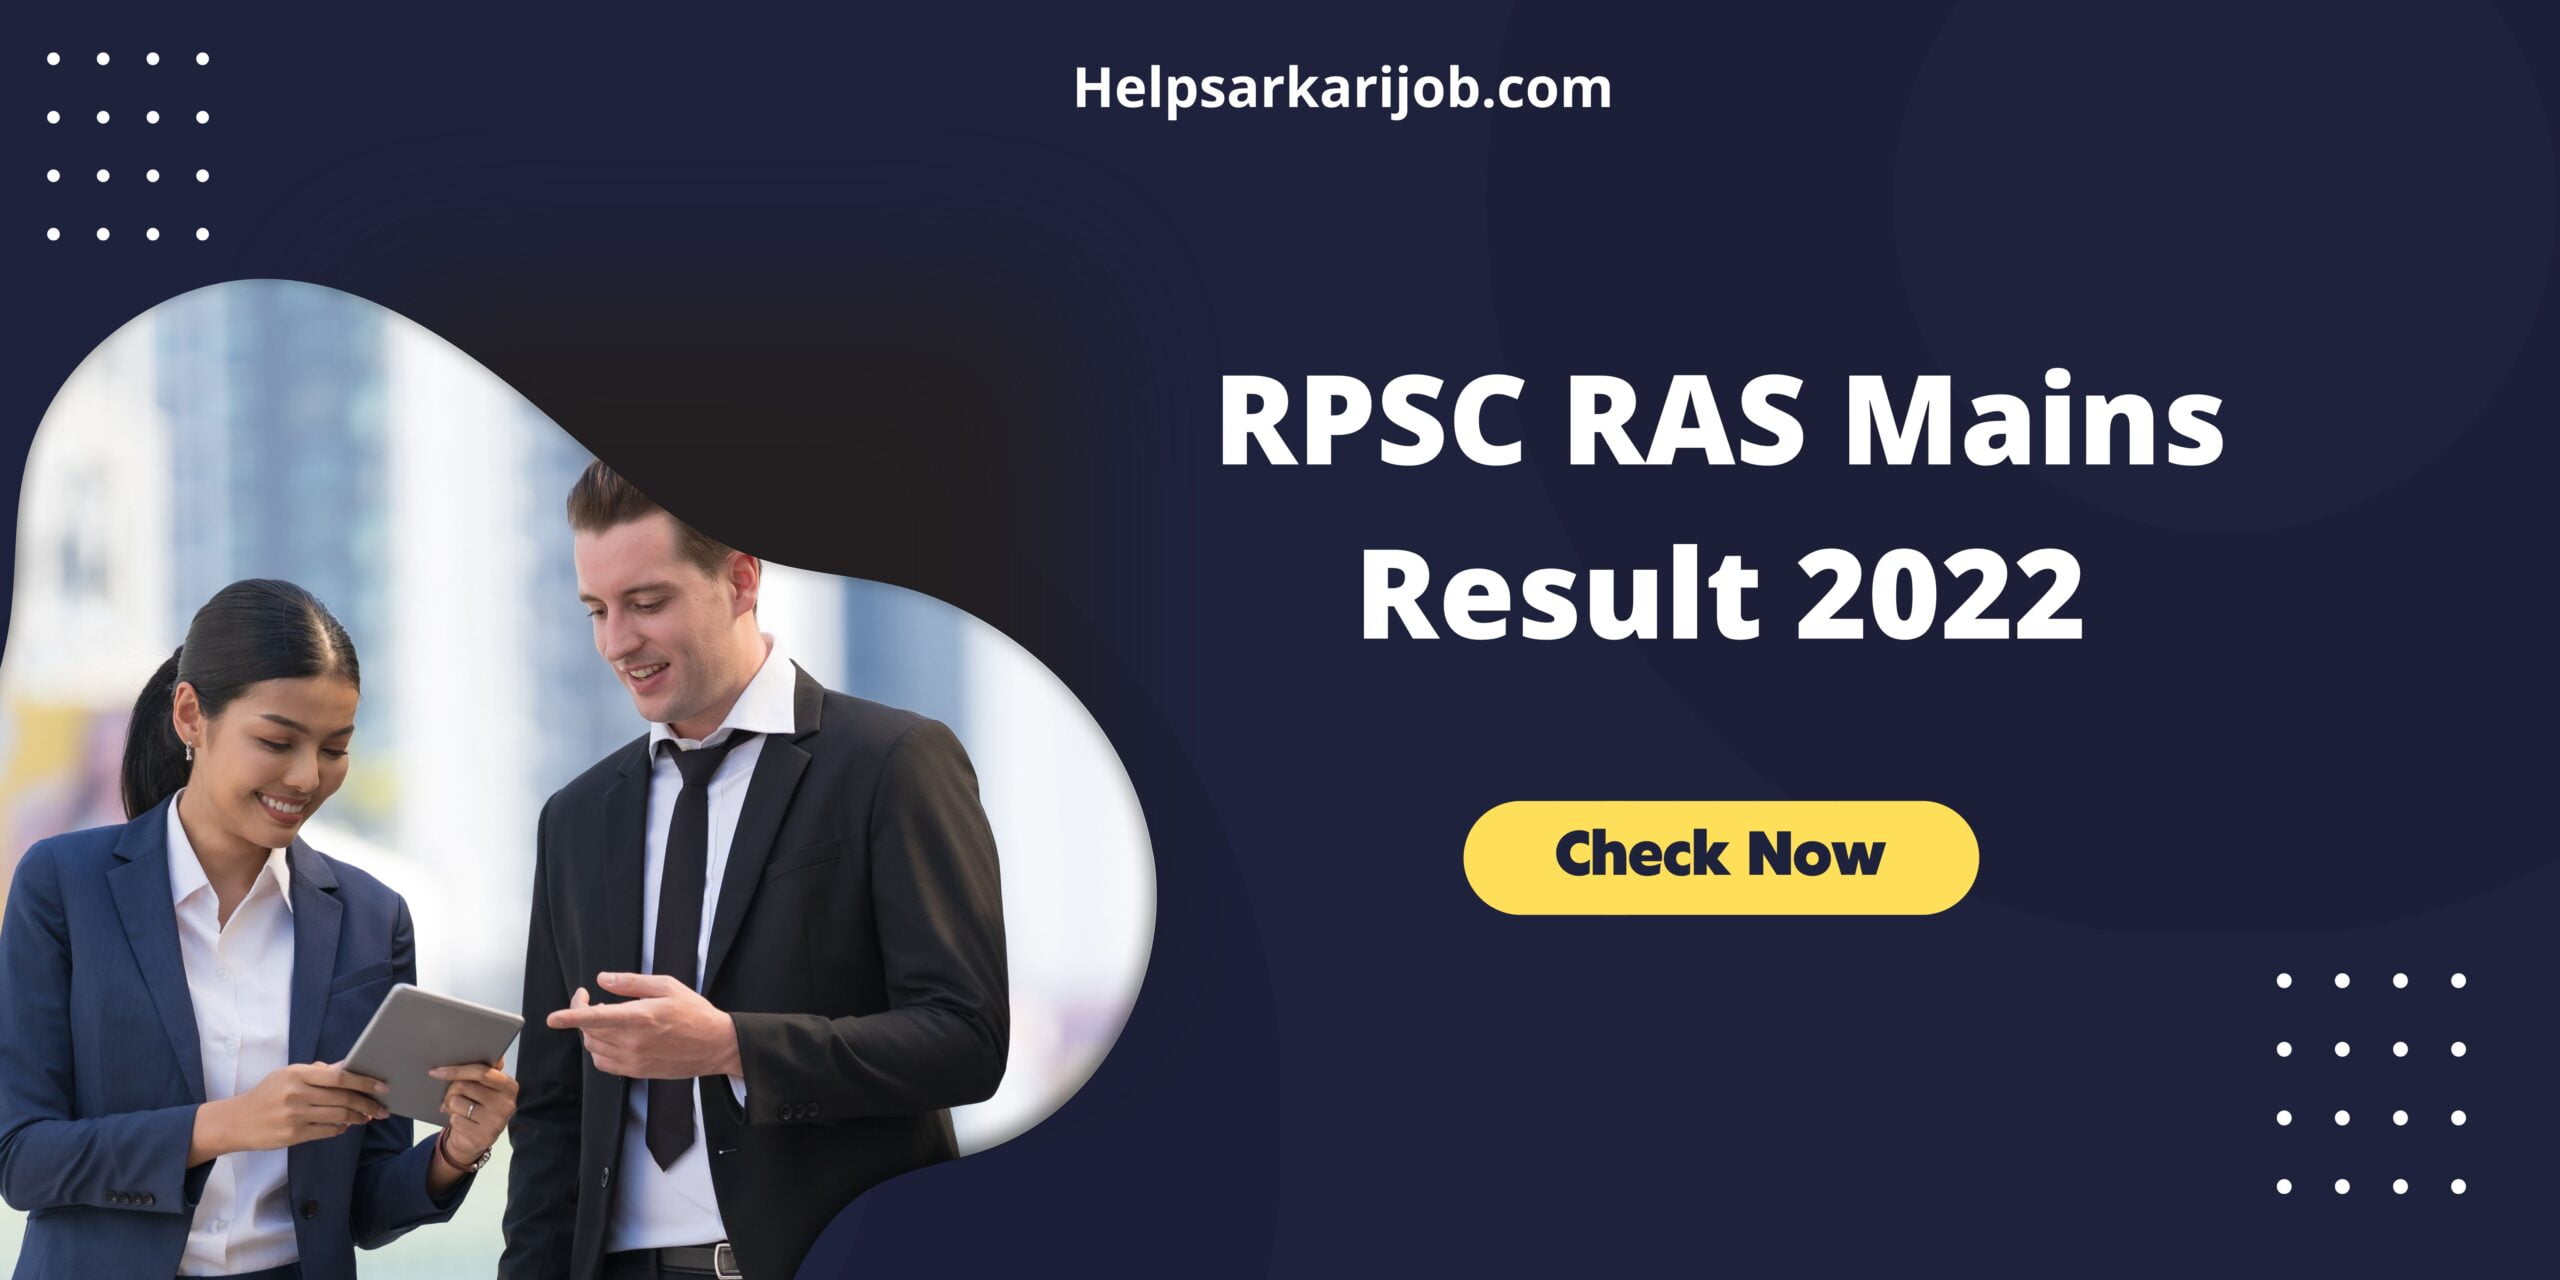 RPSC RAS Mains Result 2022 scaled -